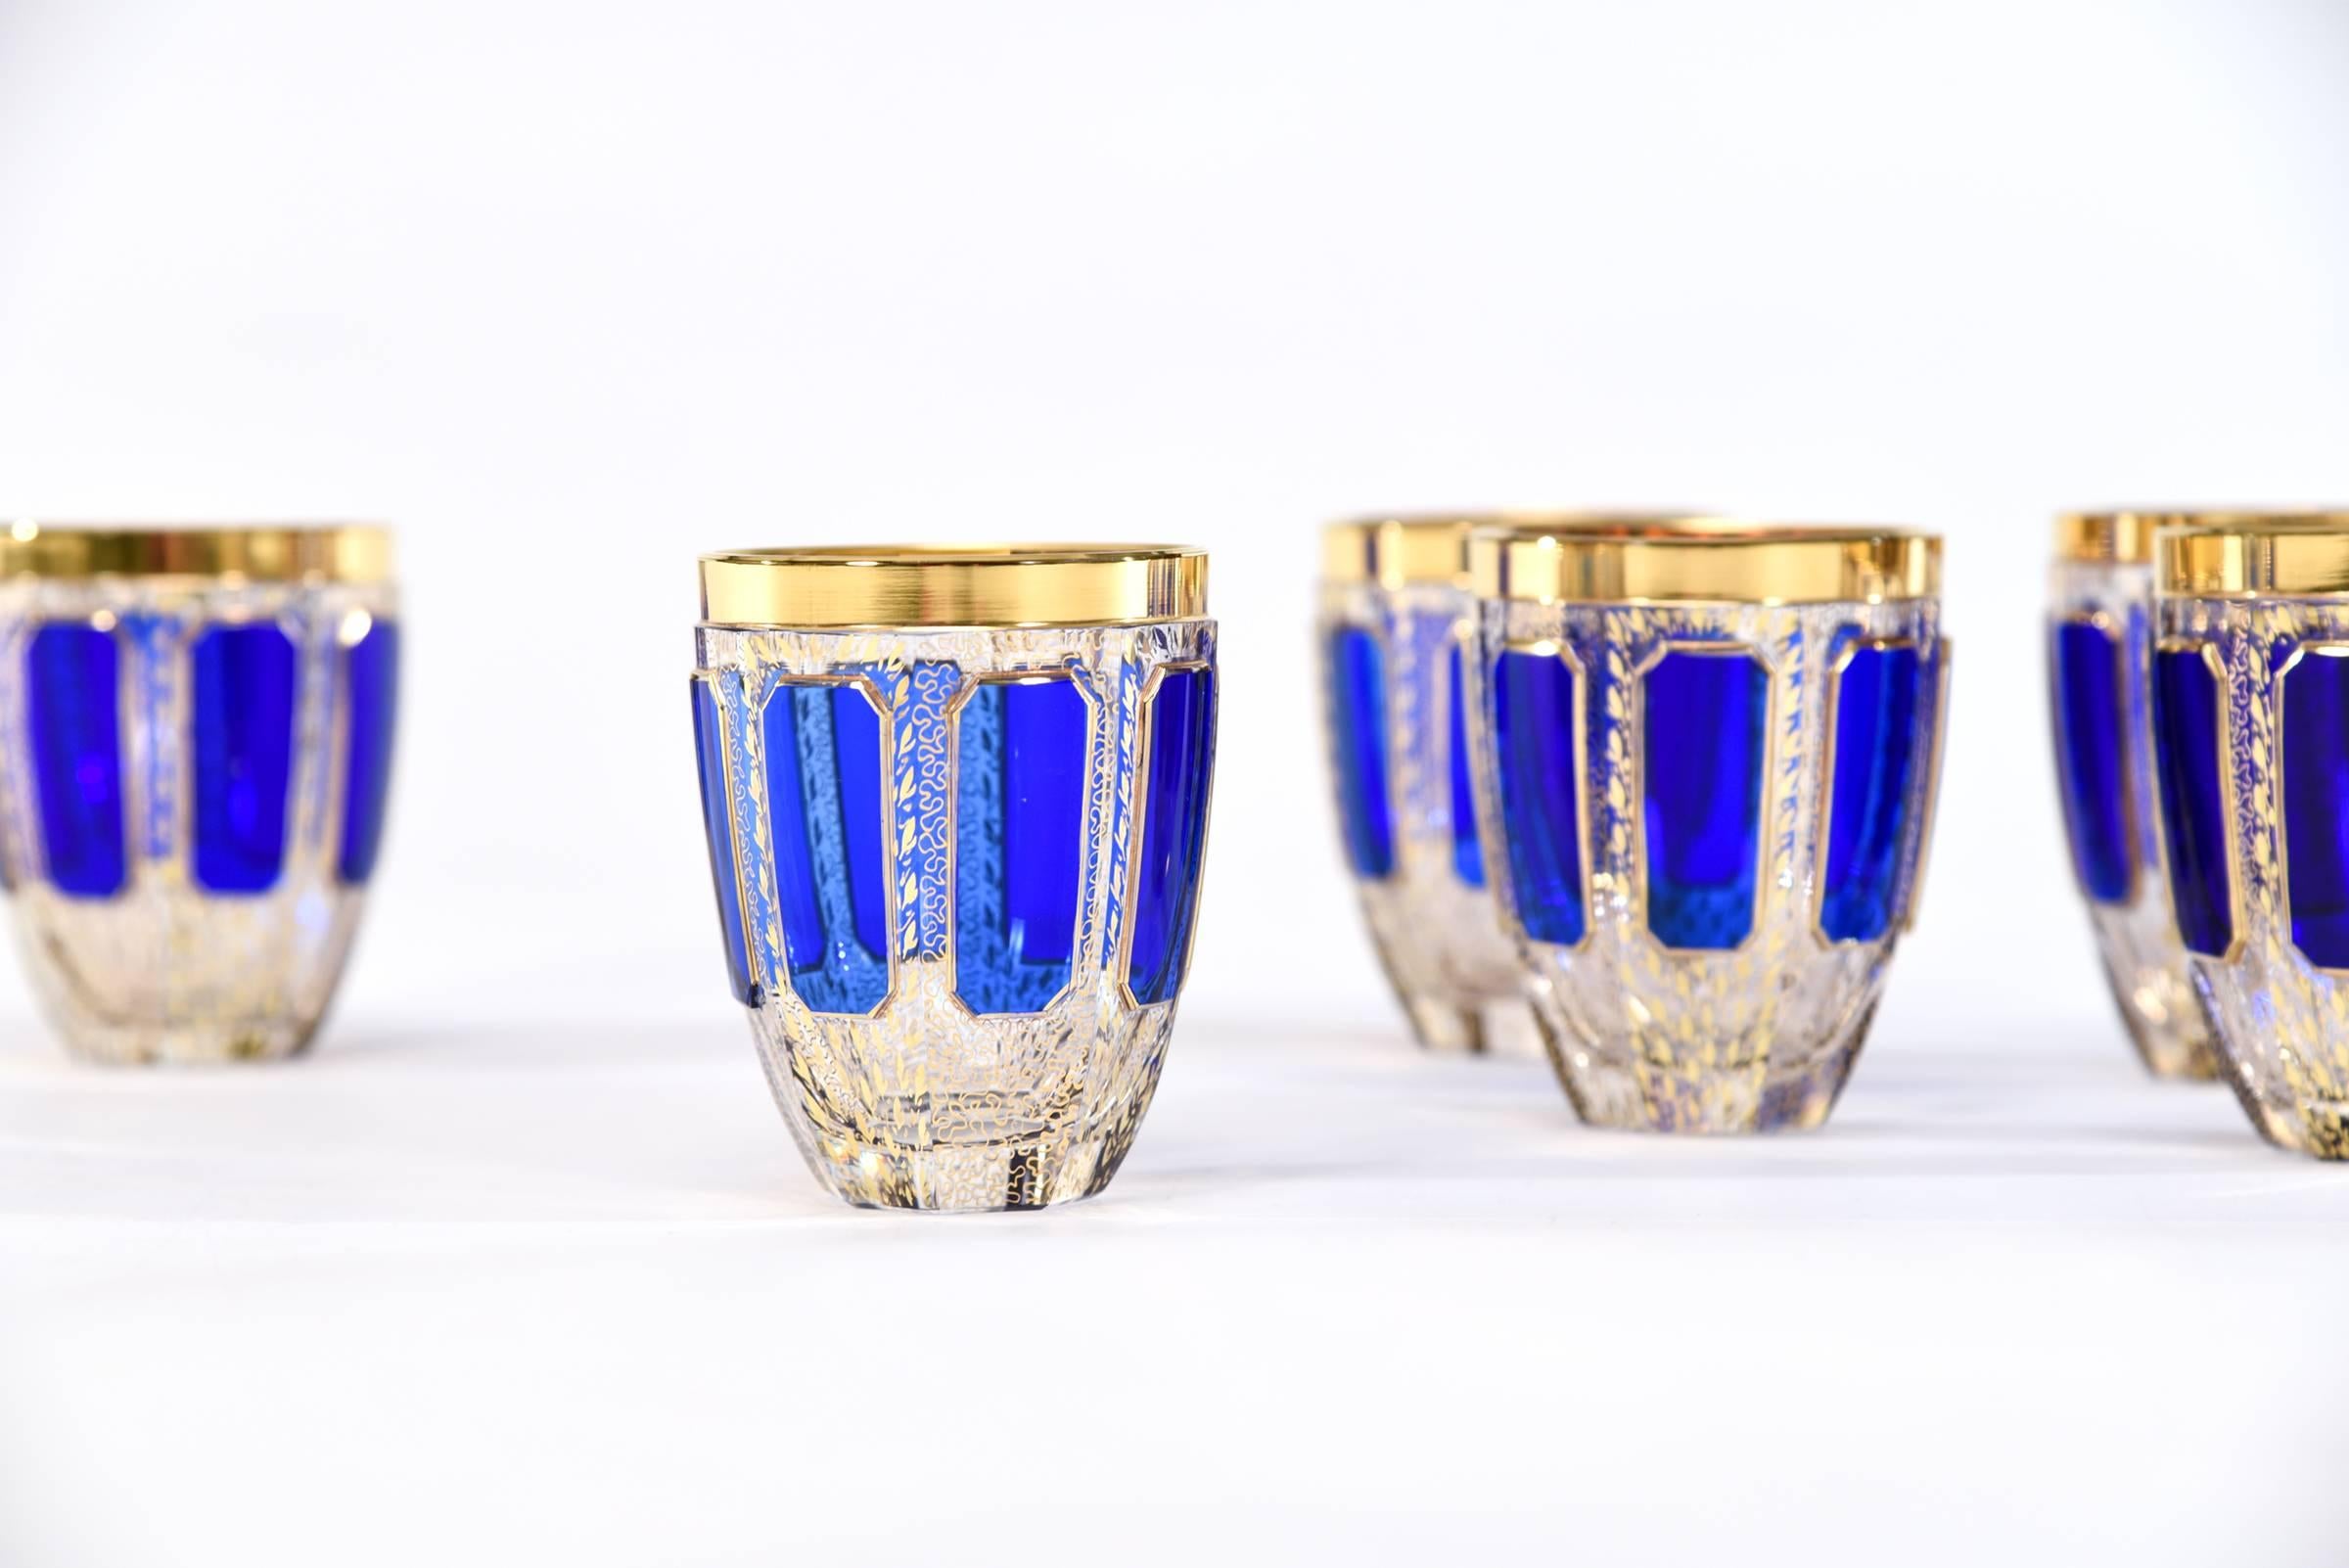 This set of eight Bohemian handblown crystal highballs with rounded base are part of a larger matching set of goblets, made by Moser. The unusual round shape feels wonderful to hold with their elongated raised panels of rich sapphire blue 